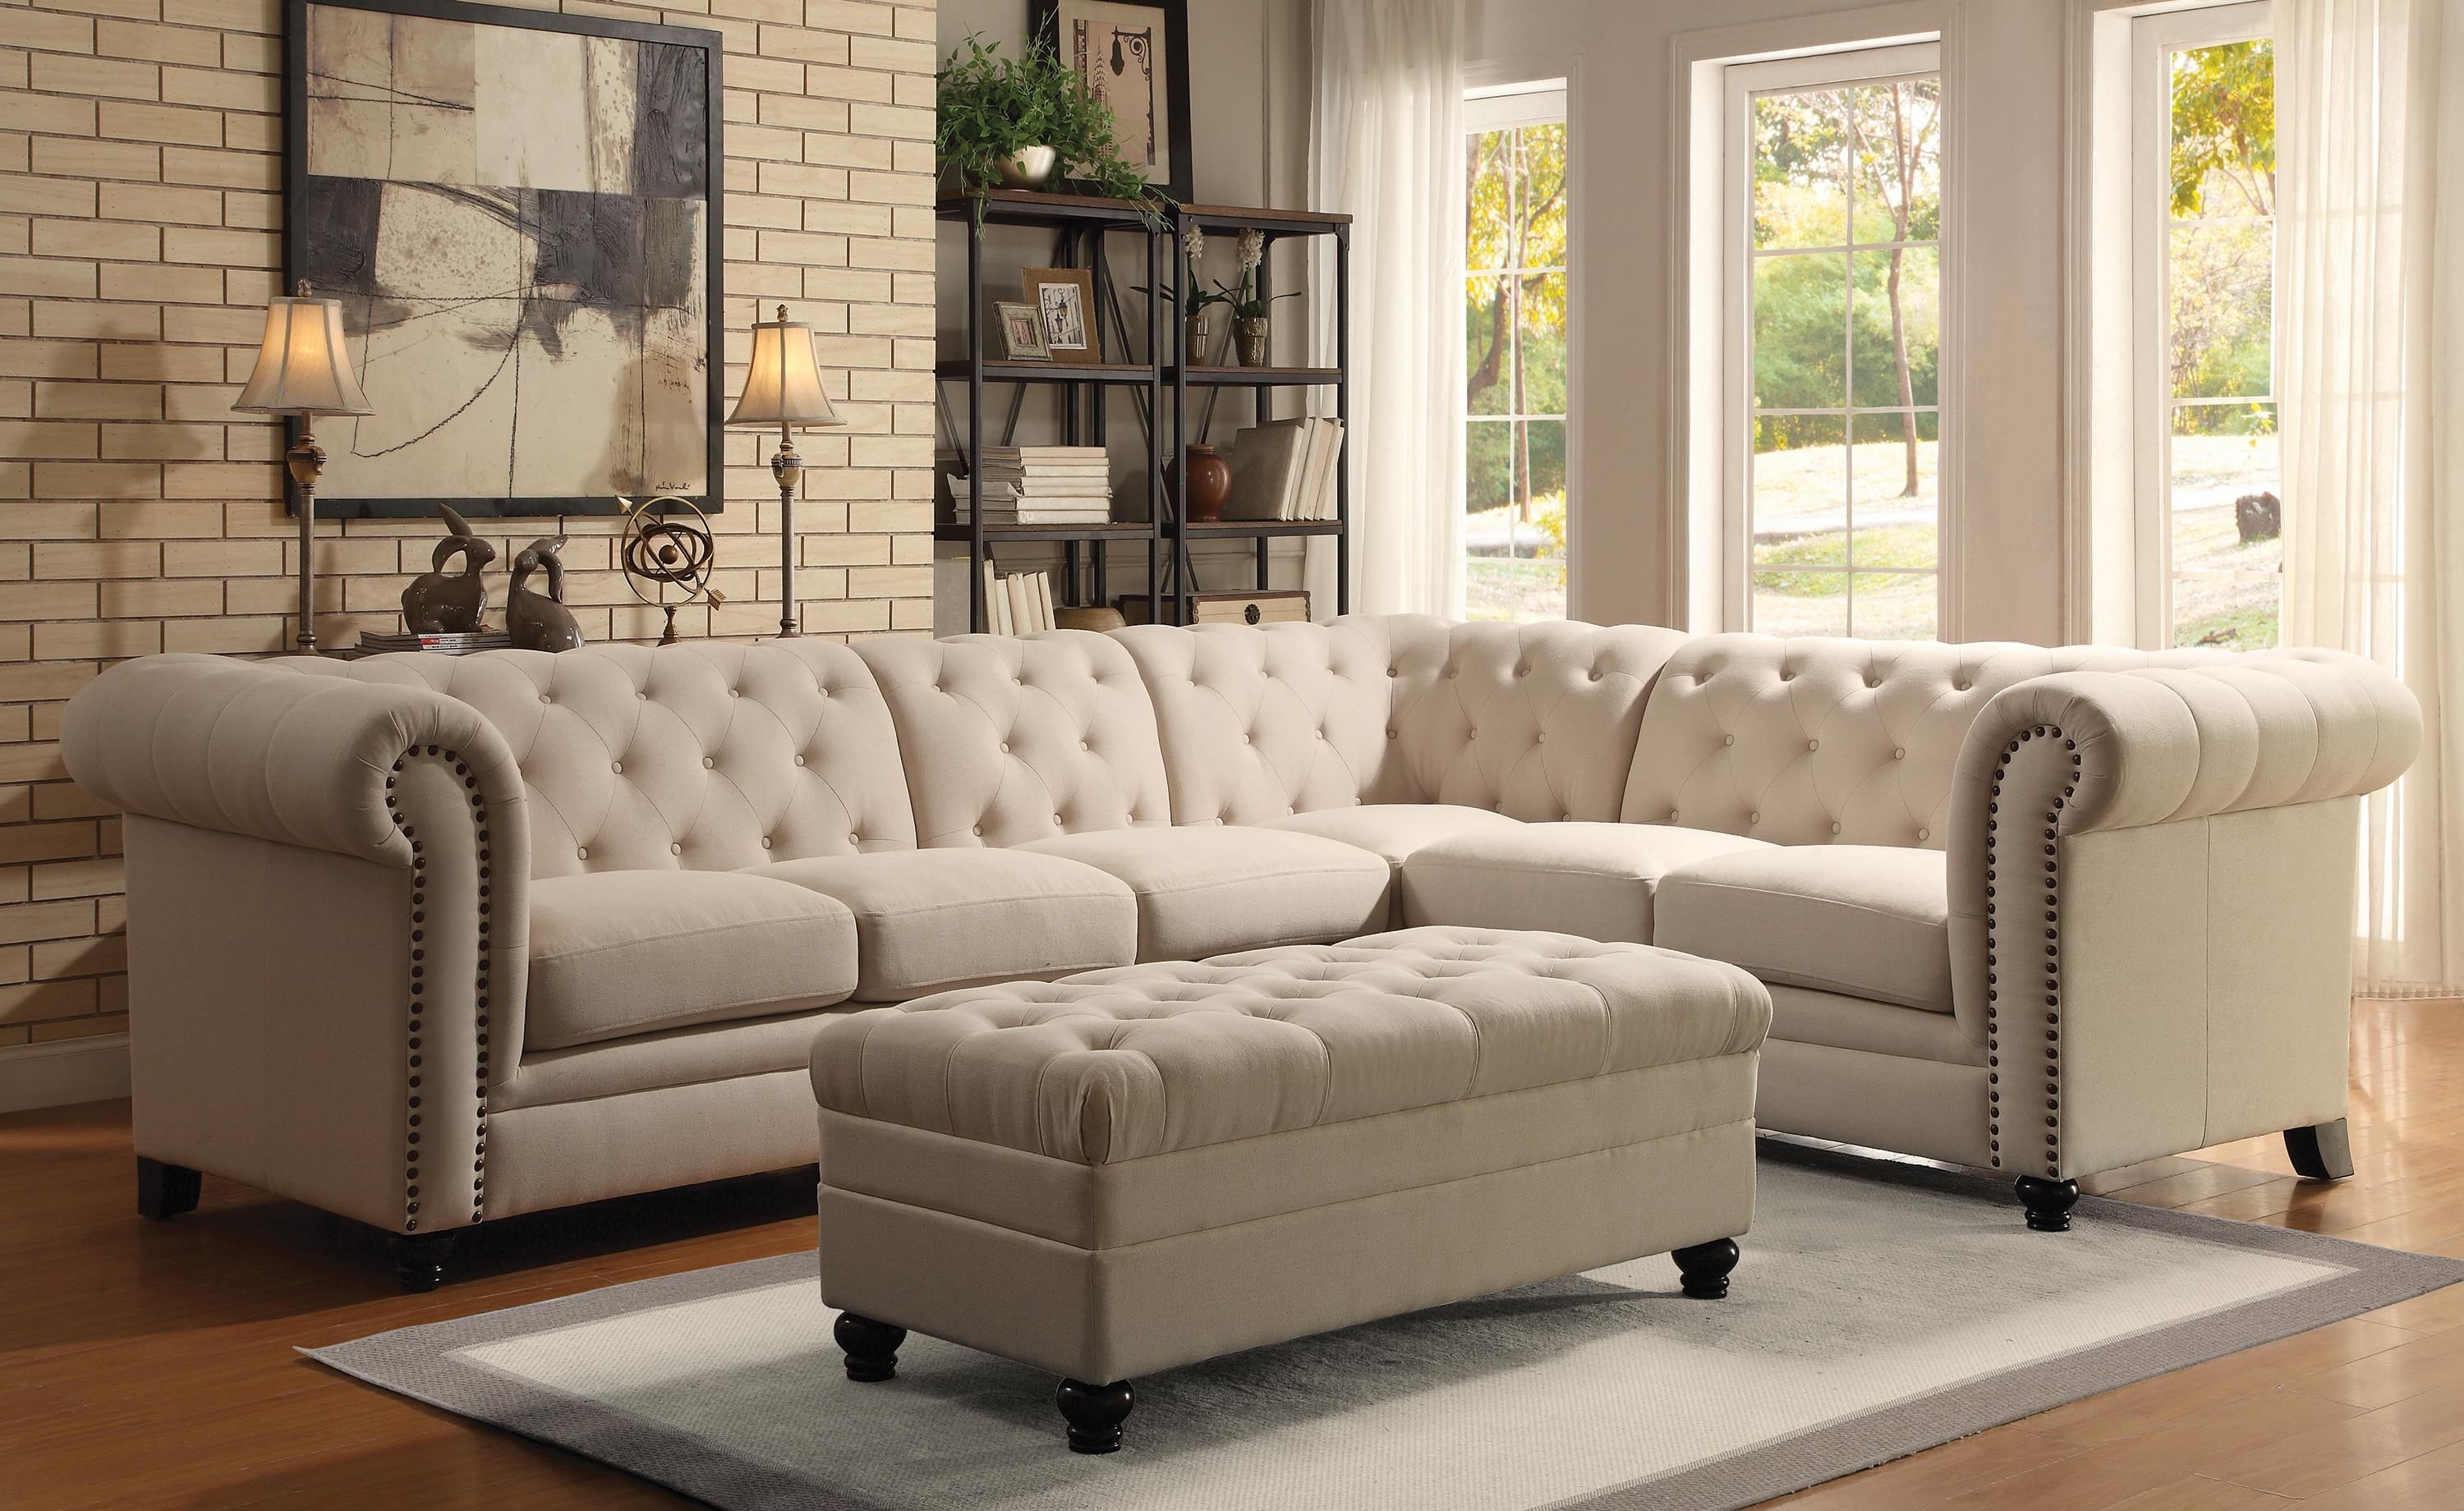 Good Tufted Sectional Sofa With Chaise 27 For Your Contemporary Sofa Within Tufted Sectional Sofas With Chaise (View 1 of 10)